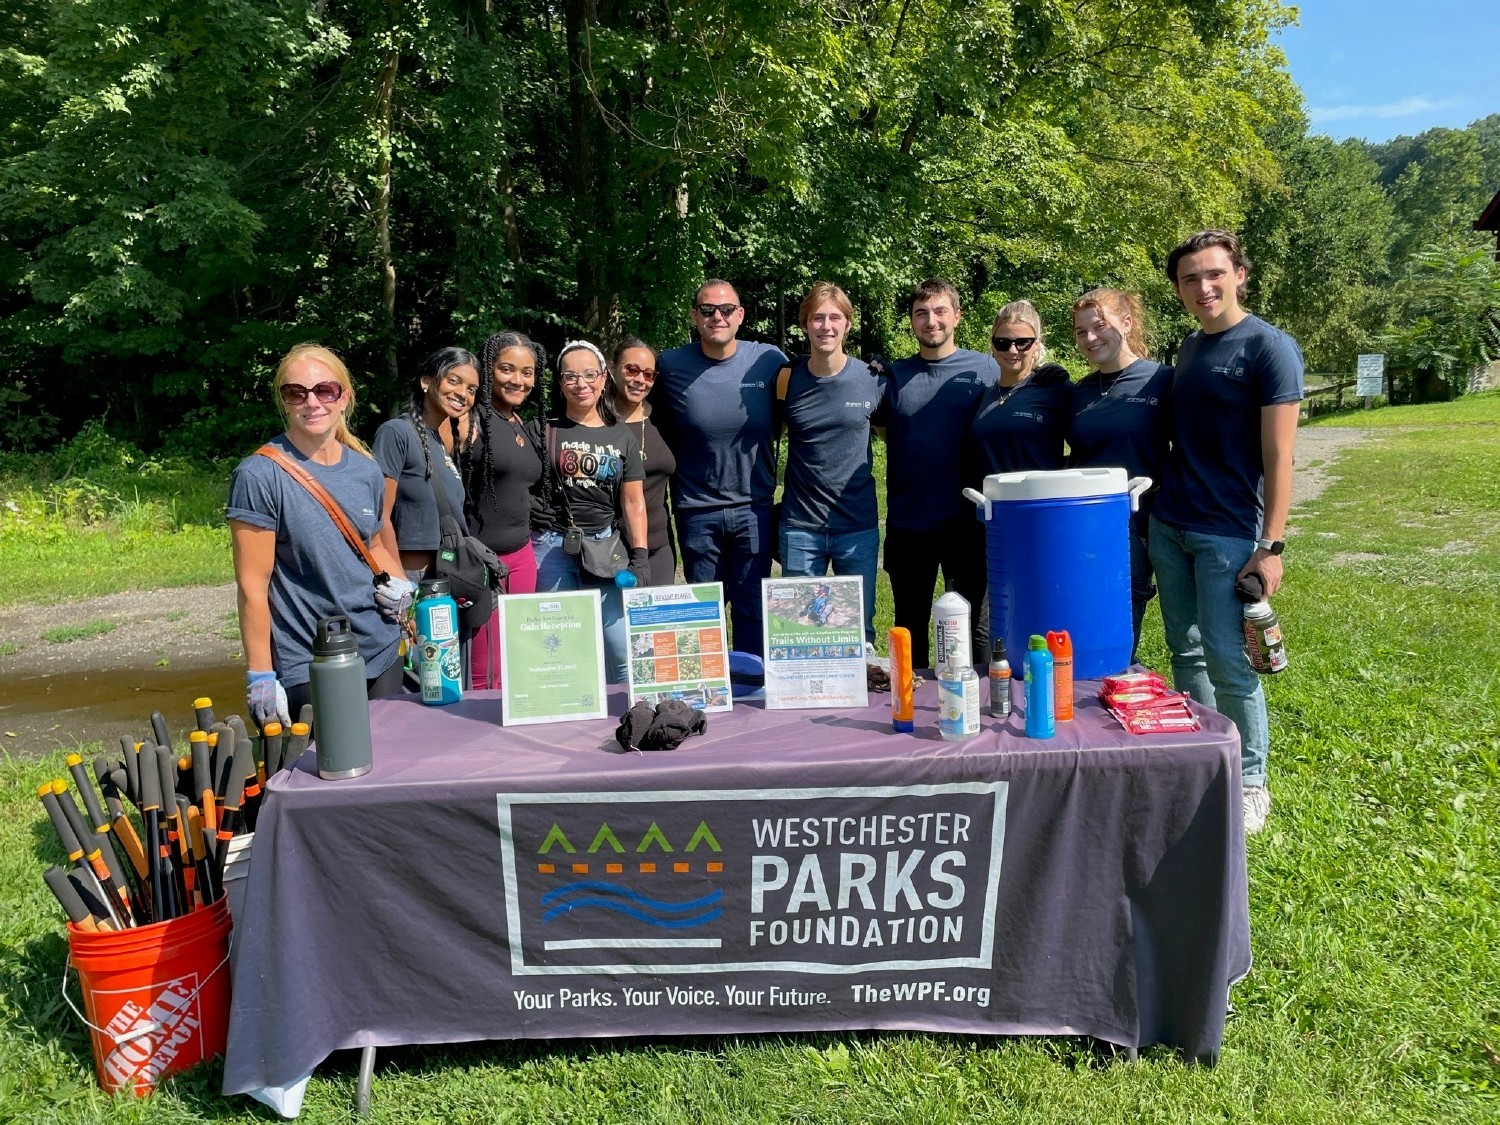 Summer Intern Volunteer event with the Westchester Parks Foundation